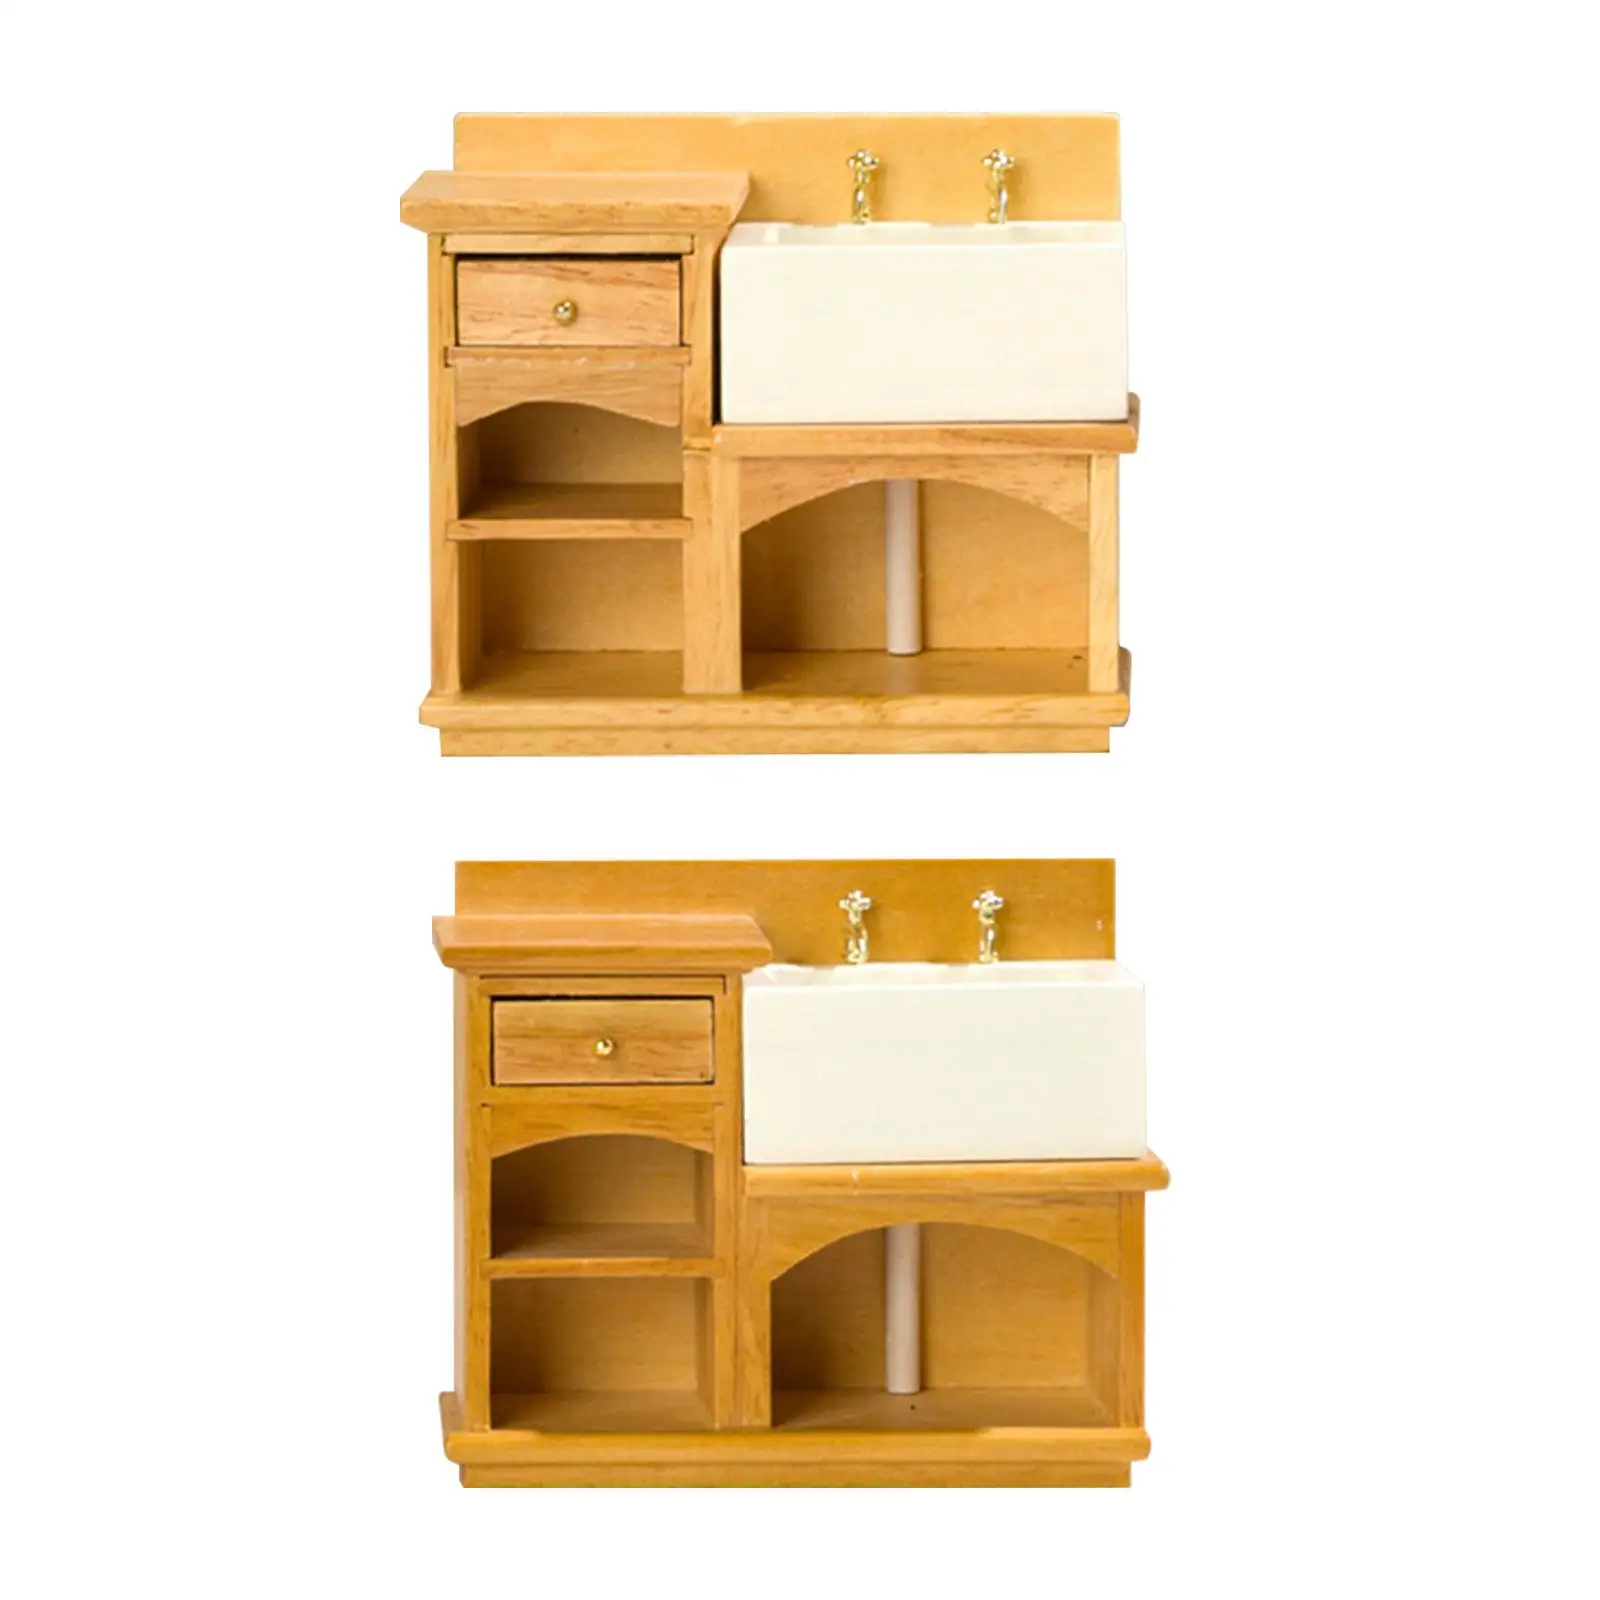 1/12 Dollhouse Wash Cabinet, 1:12 Dollhouse Wash Cabinet Model 1:12 Miniature Cabinet Furniture for Holiday Present Adults